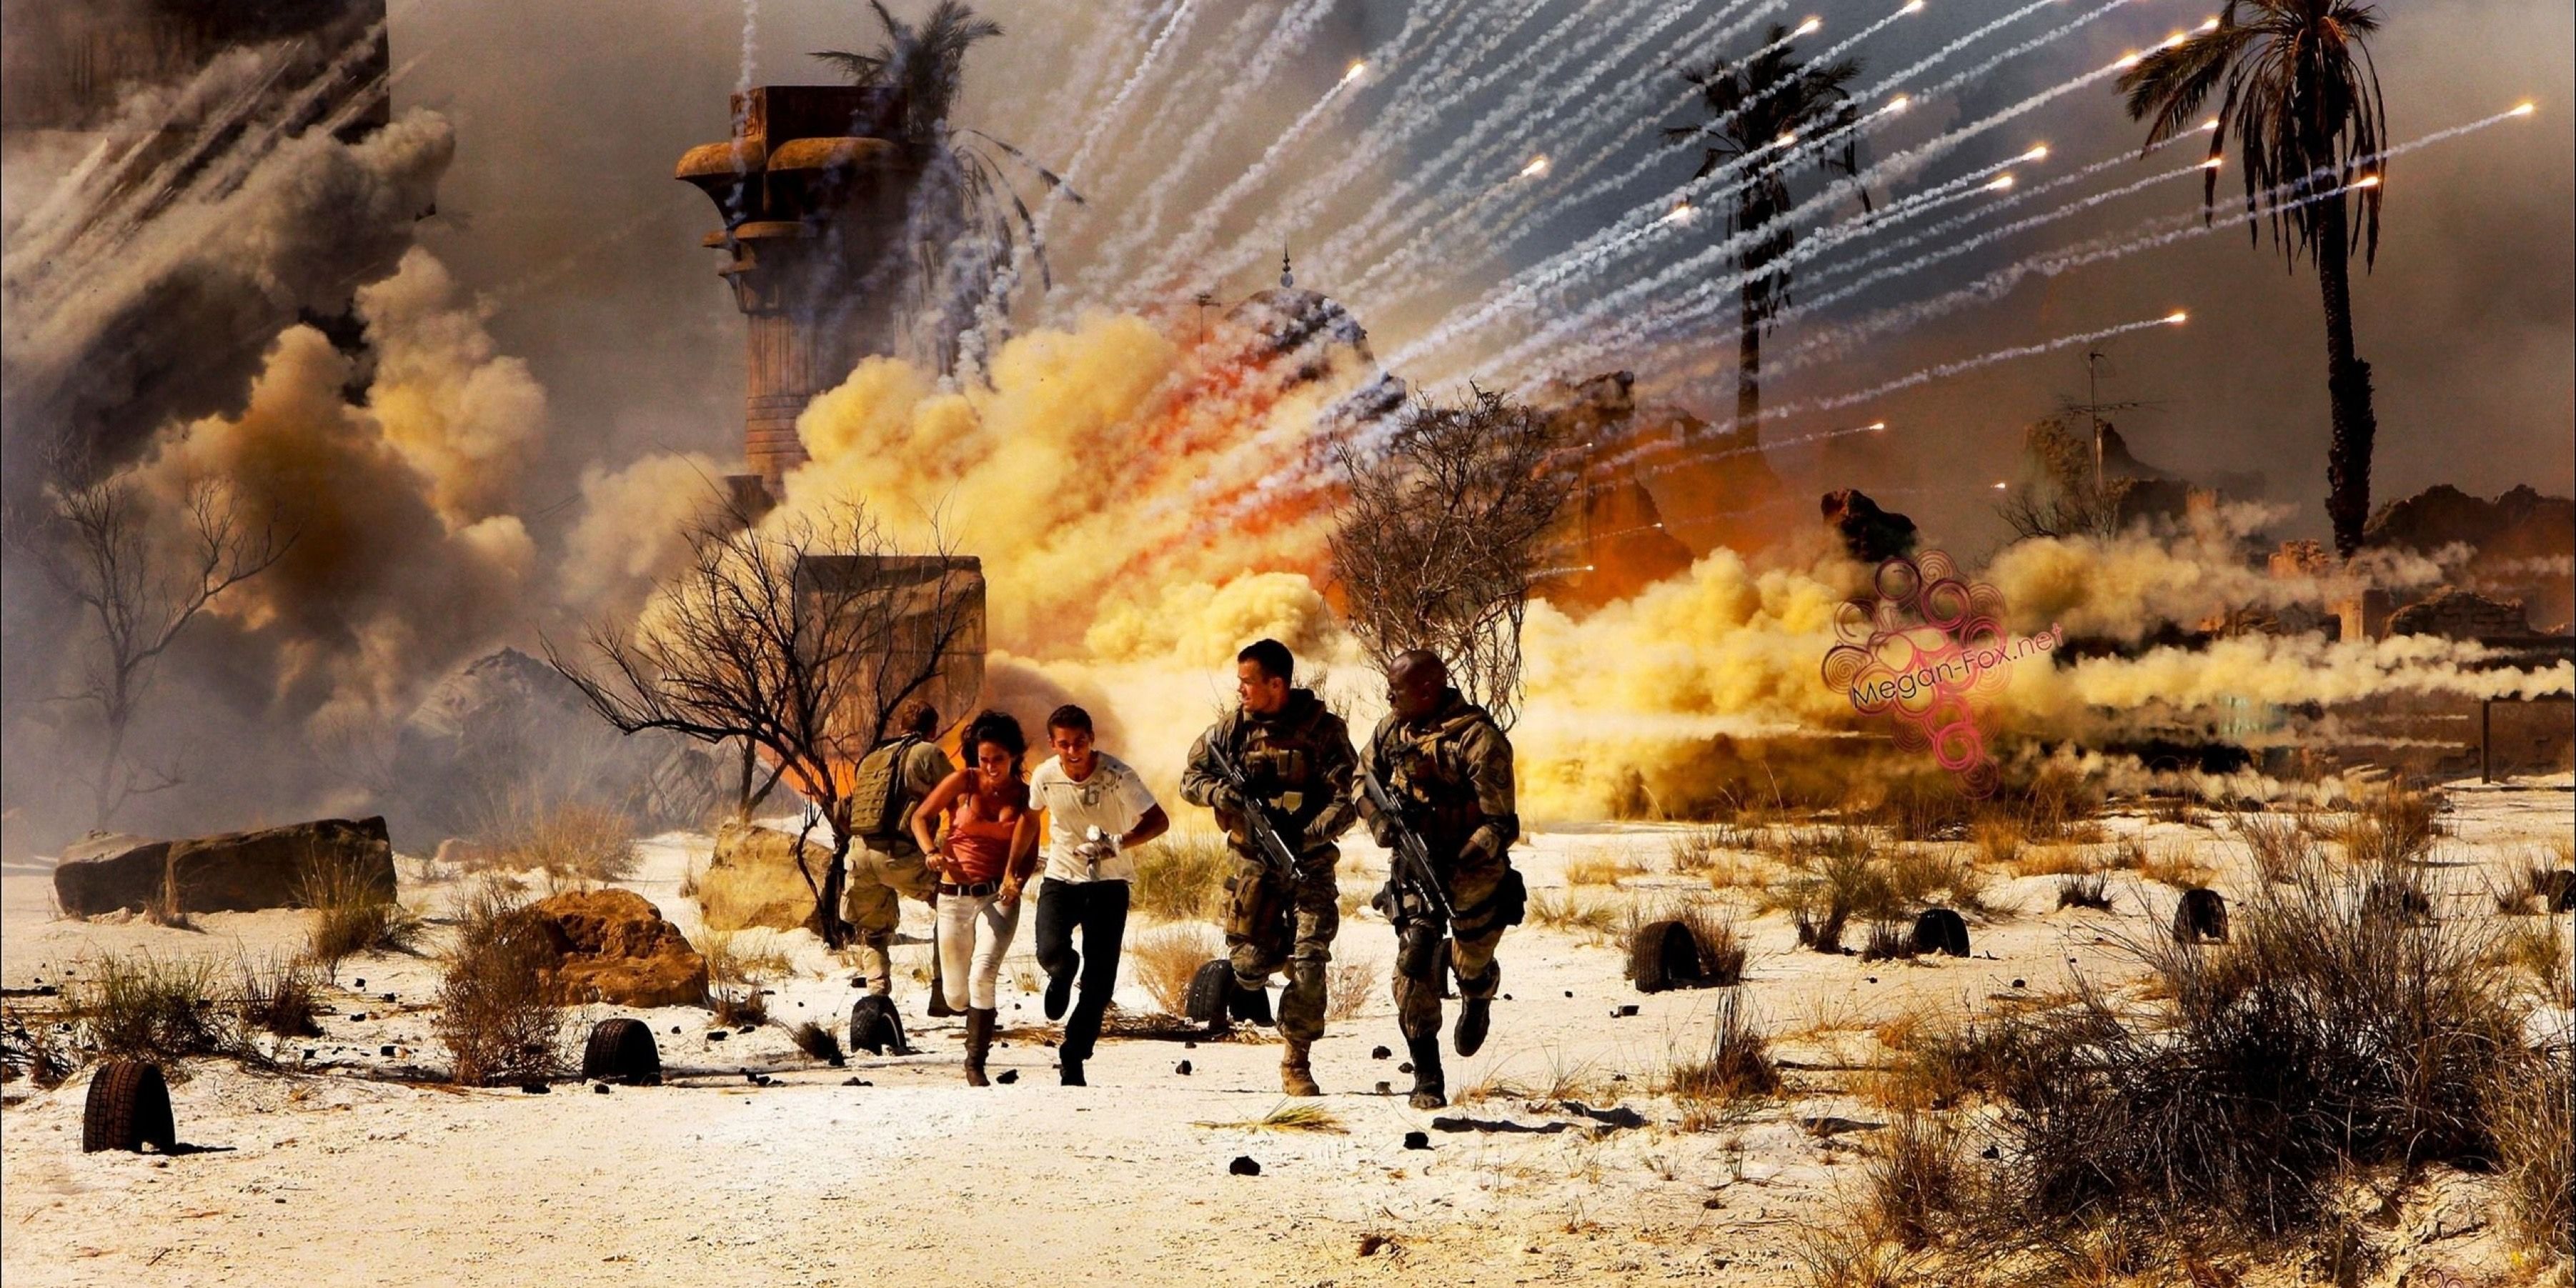 Action scene with characters running from explosion from Transformers